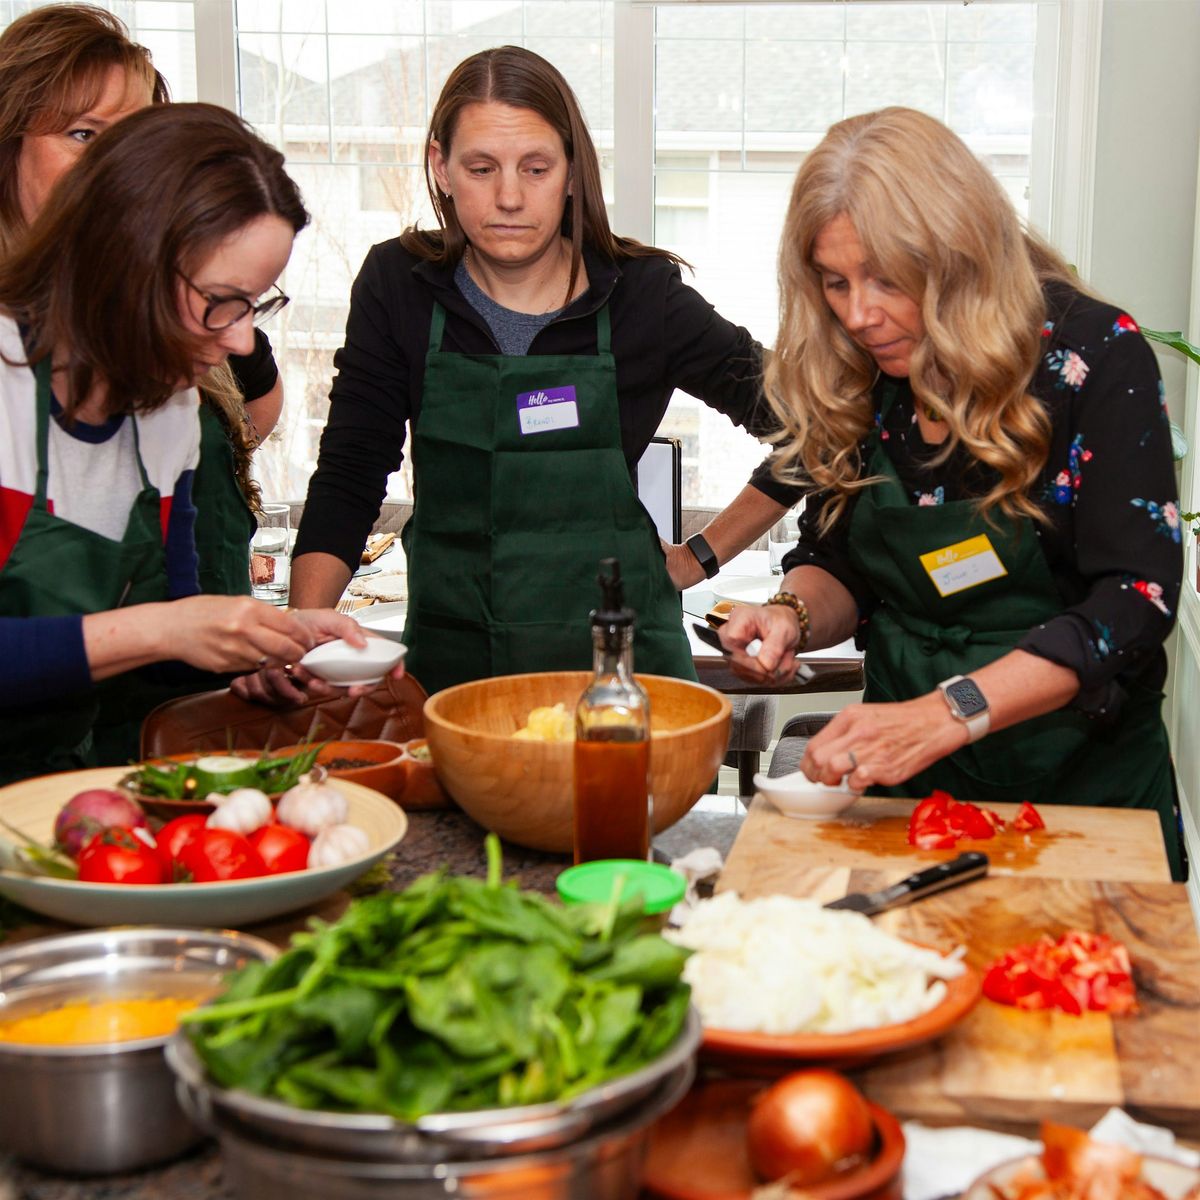 Curry Cooking Class - Learn the basics of curry